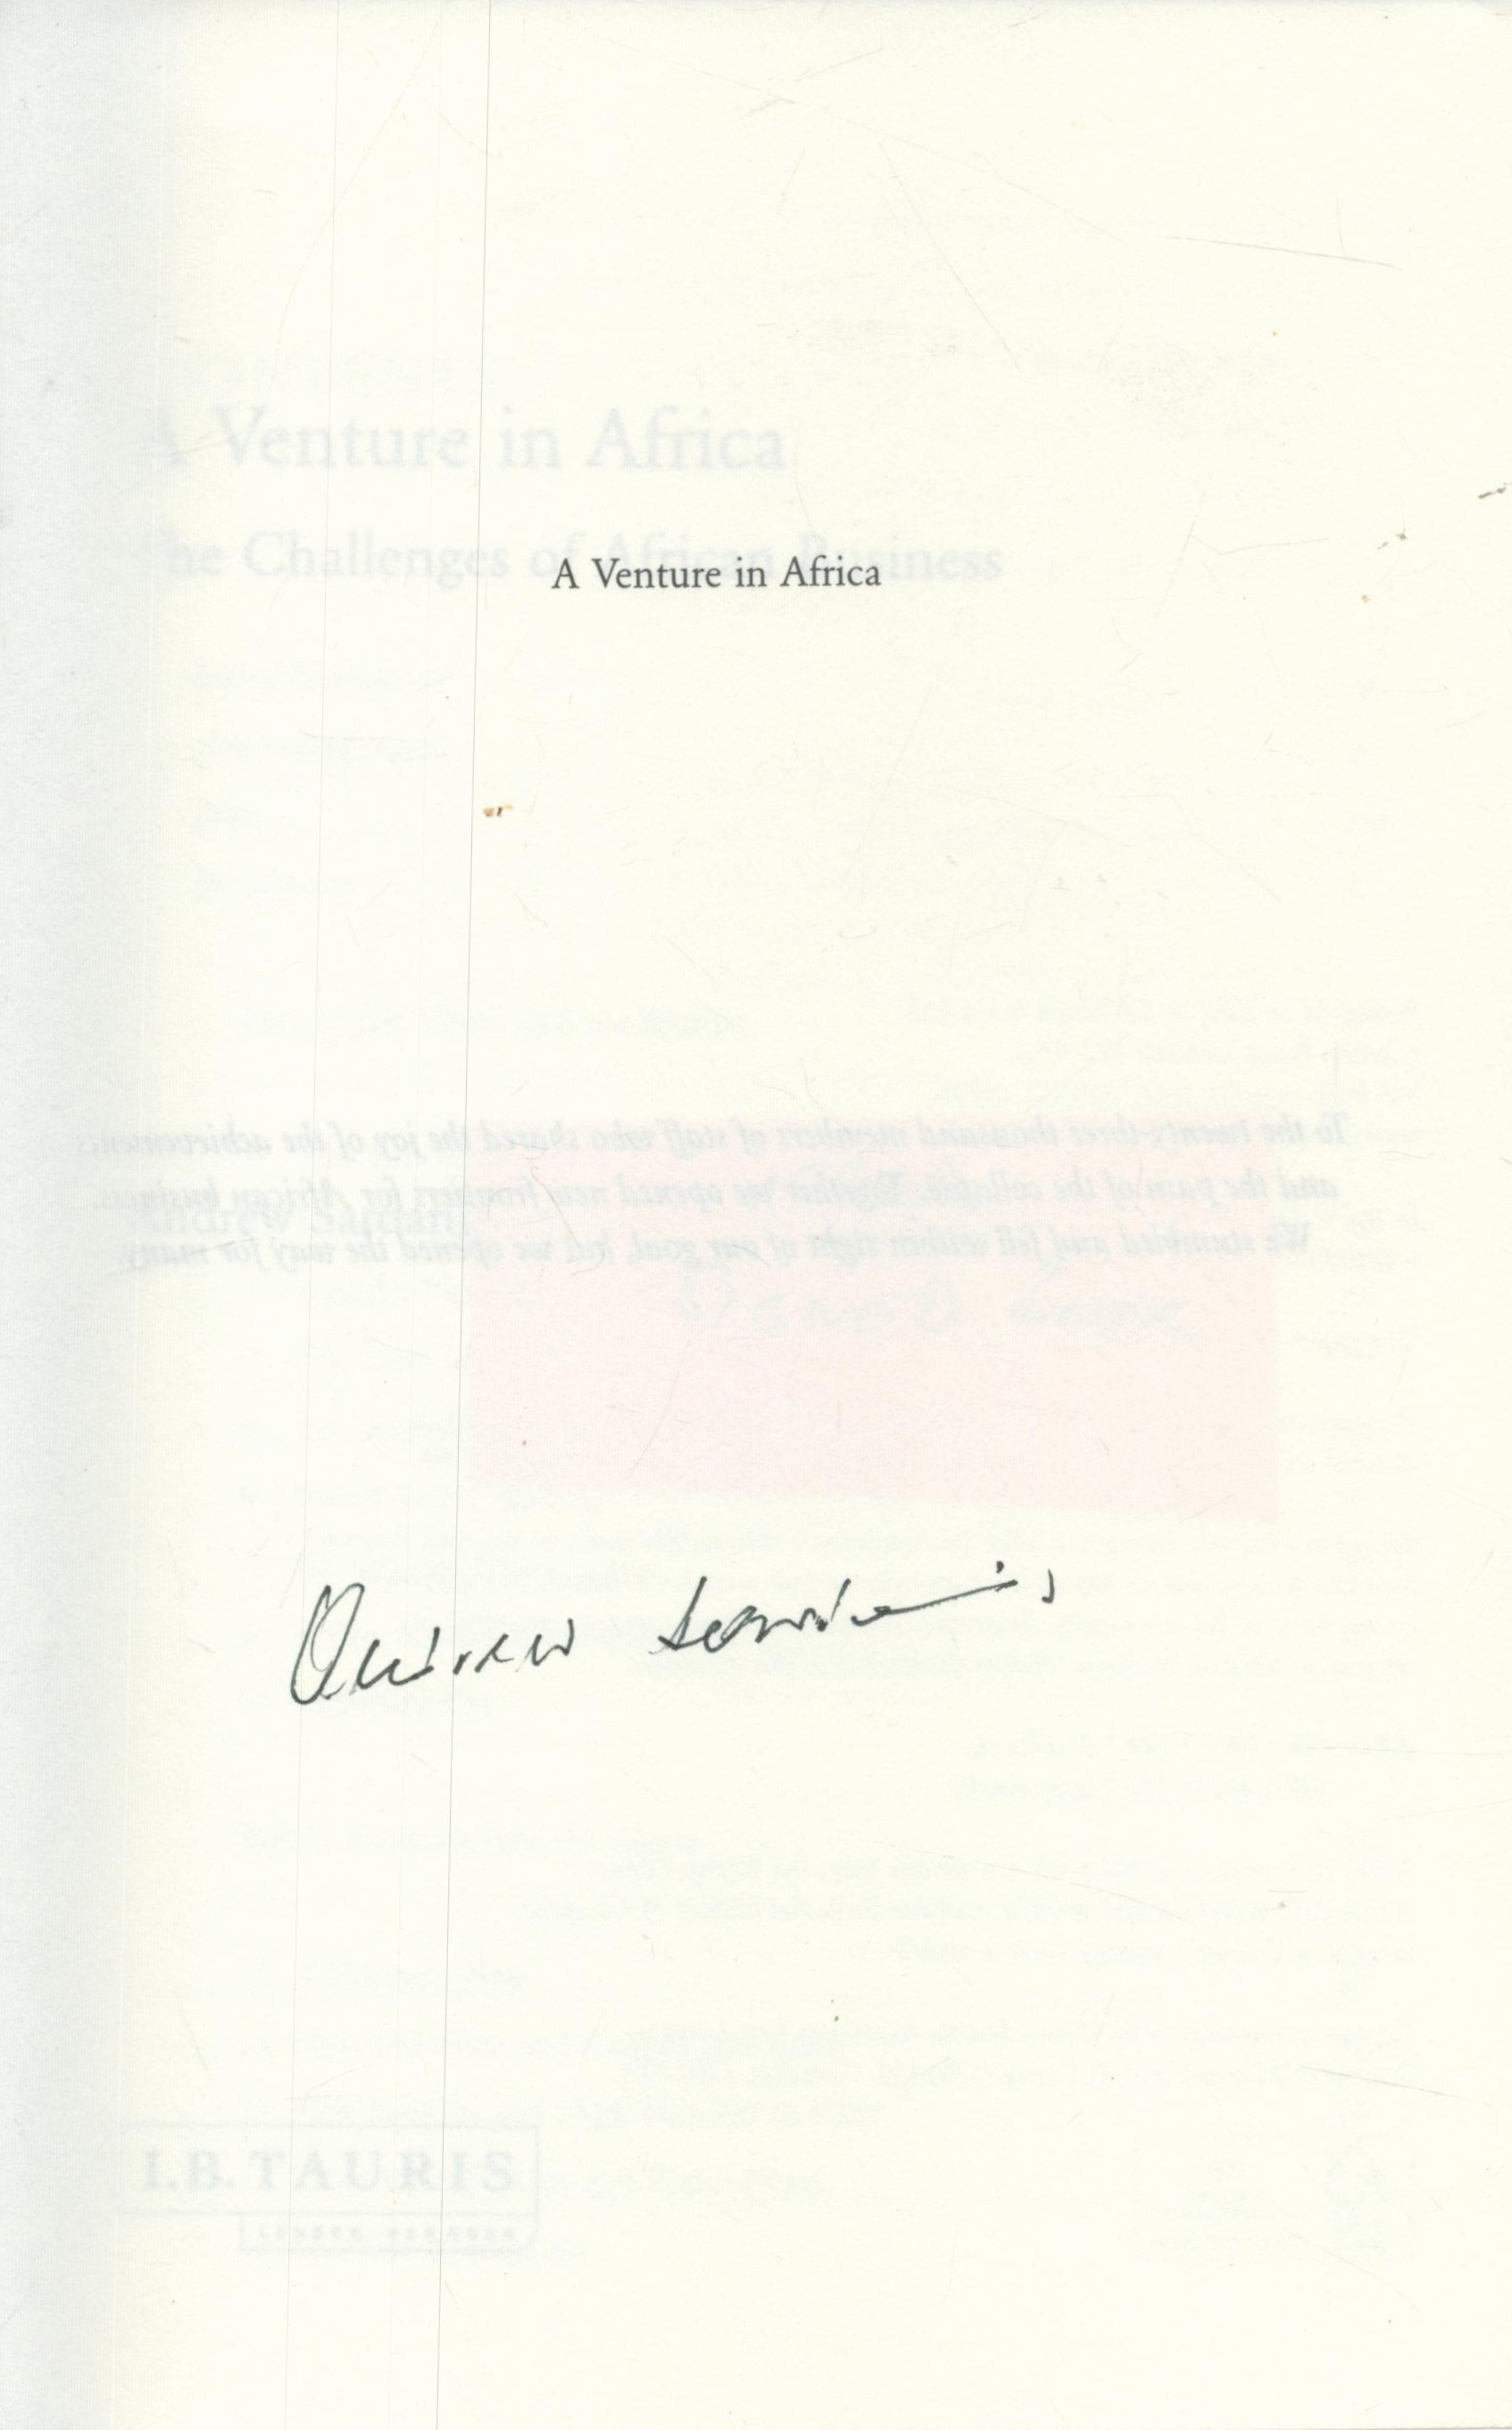 A Venture in Africa: The Challenges of African Business by Andrew Sardanis signed by author, First - Image 2 of 4